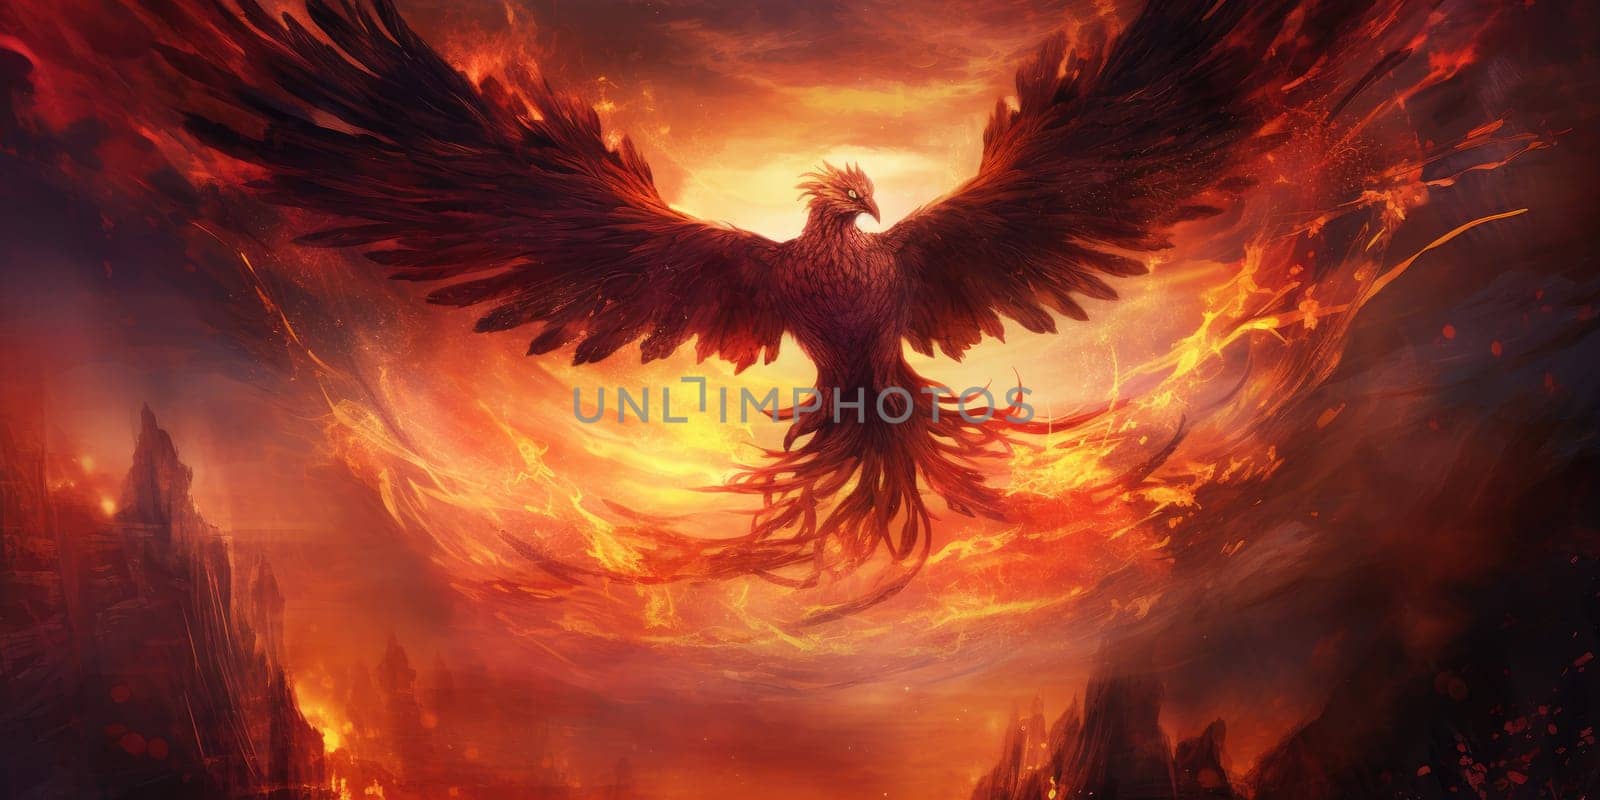 Mystic phoenix with a burned, fiery core background